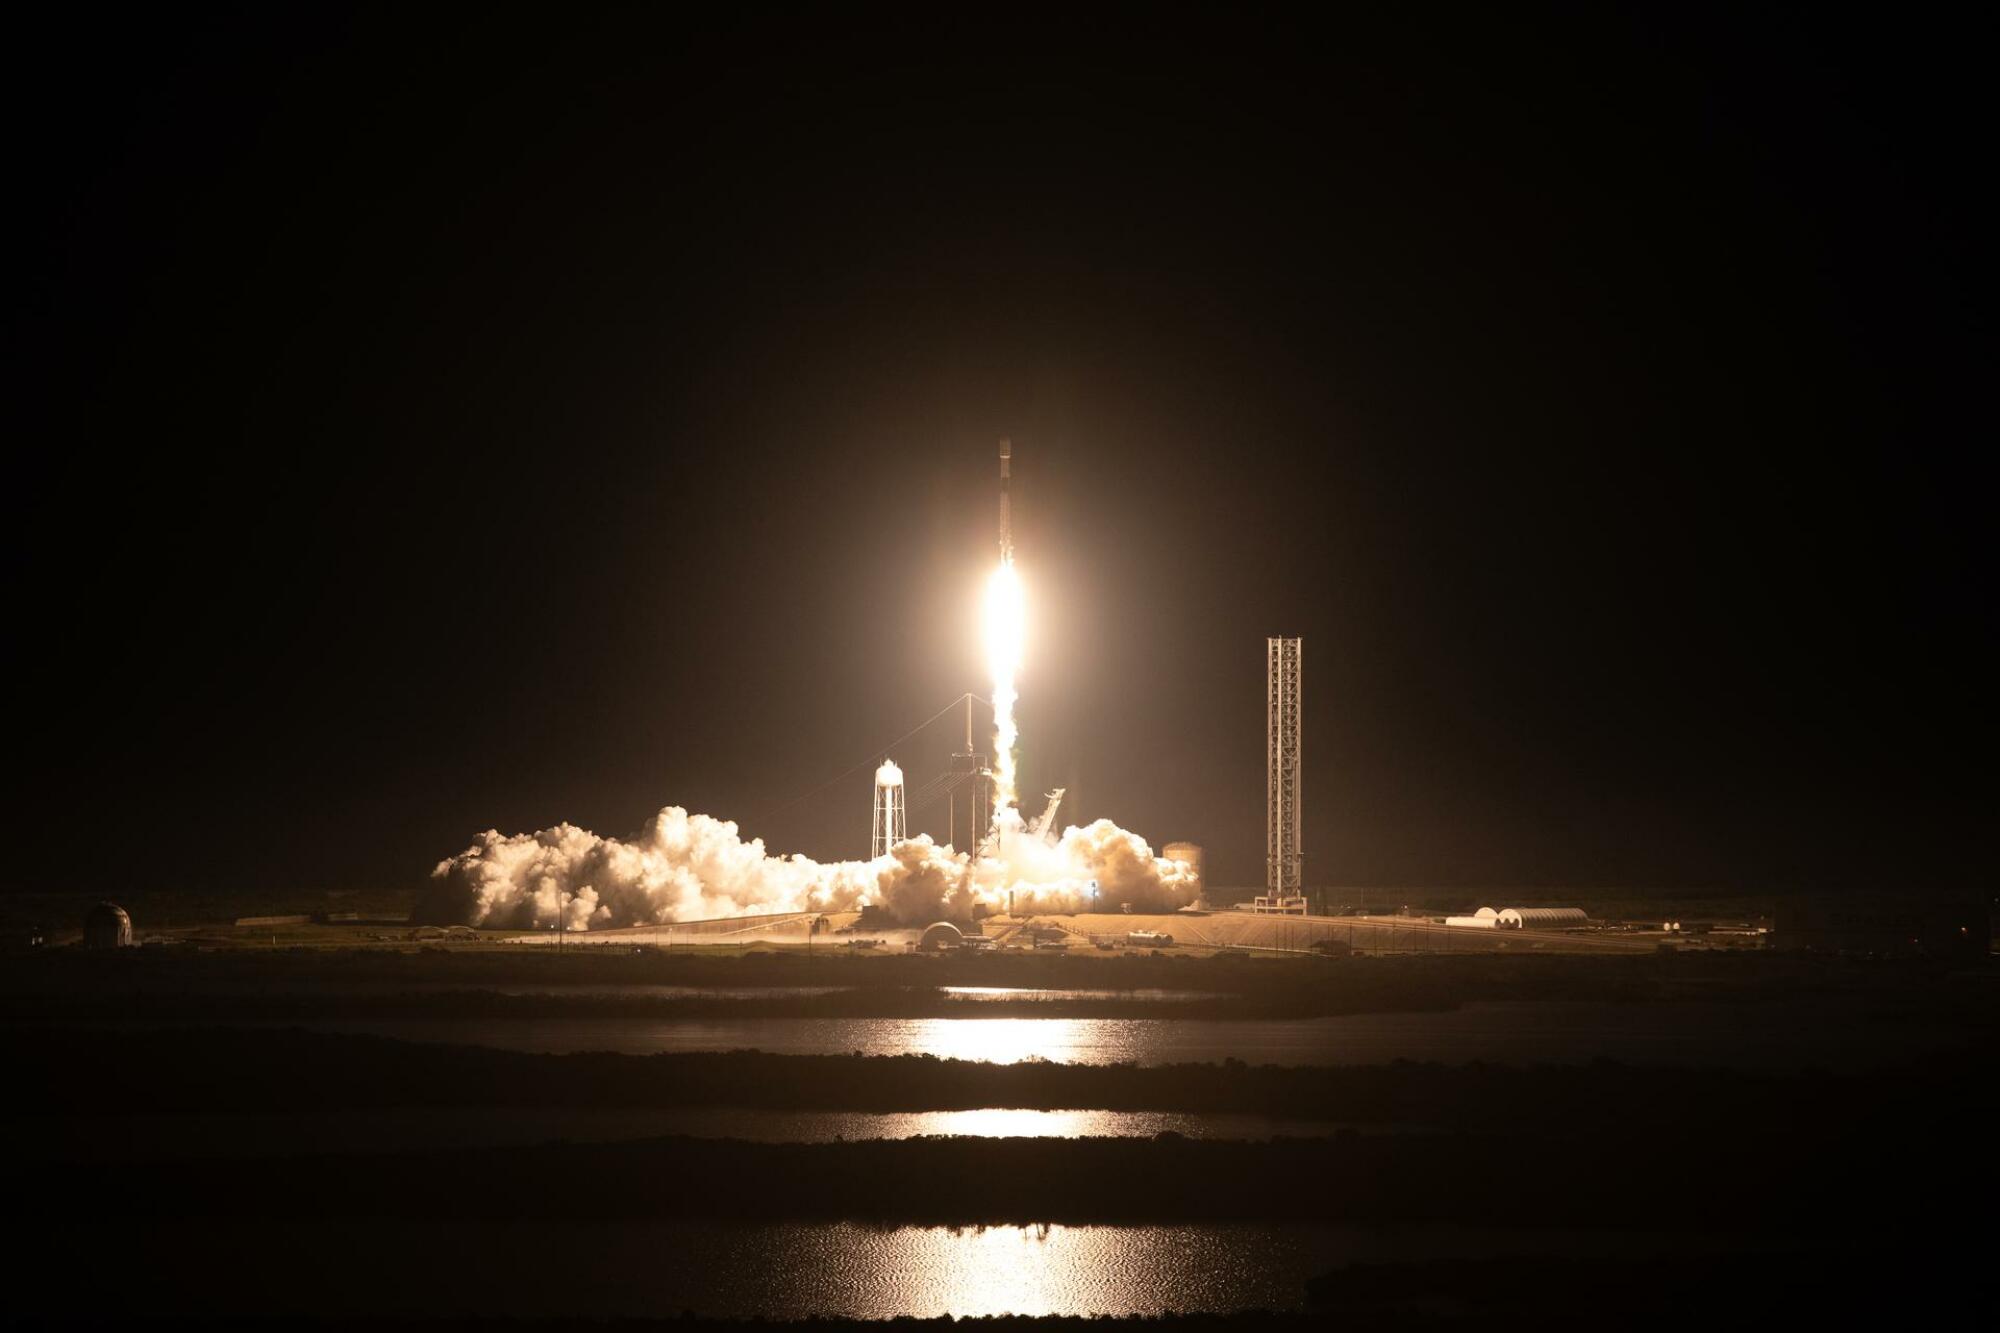 SpaceX launching Intuitive Machines' Nova-C lander to the moon